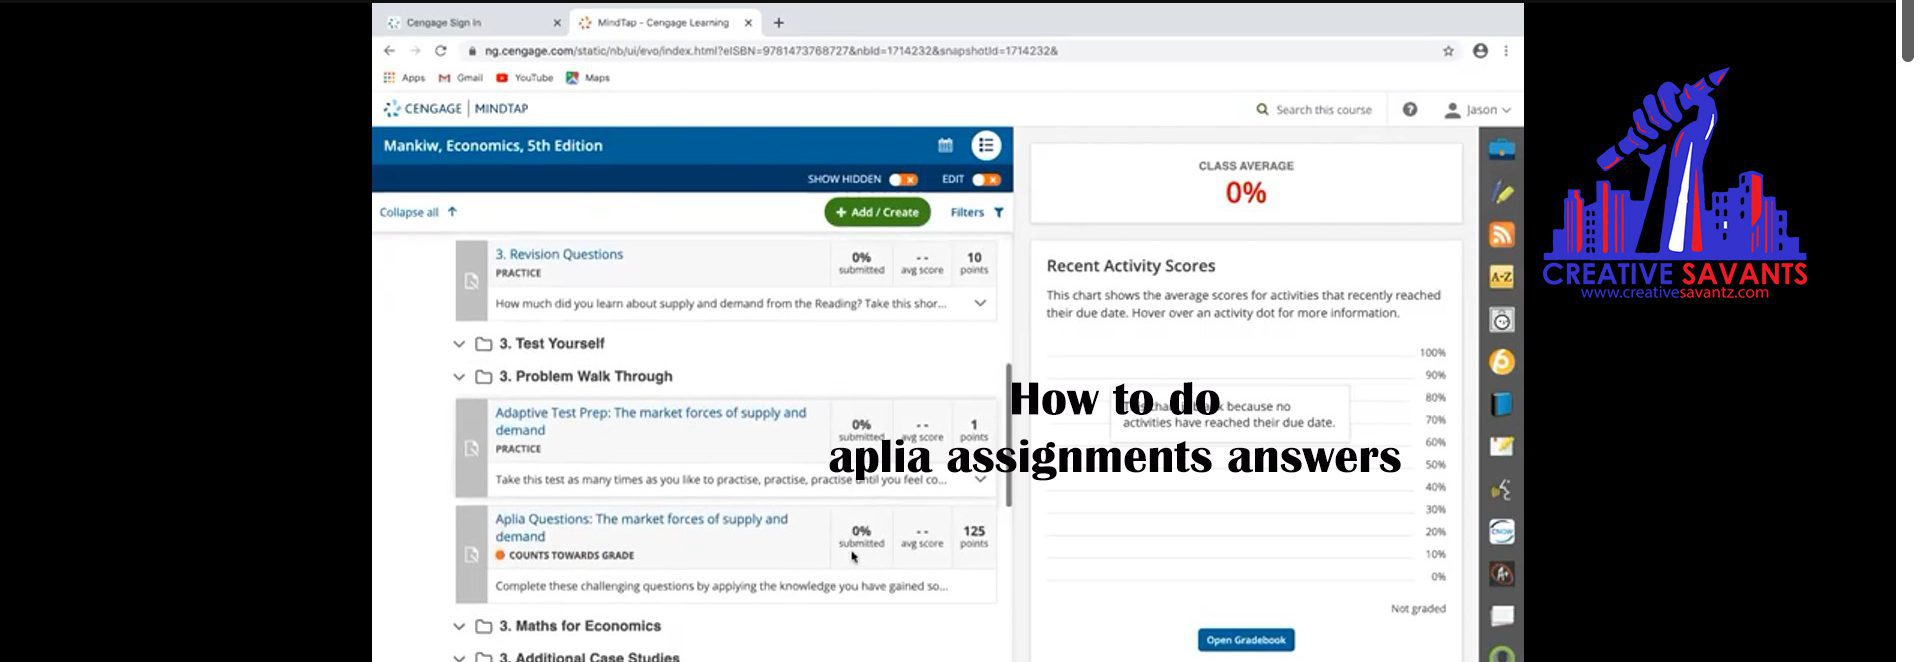 aplia assignments answers